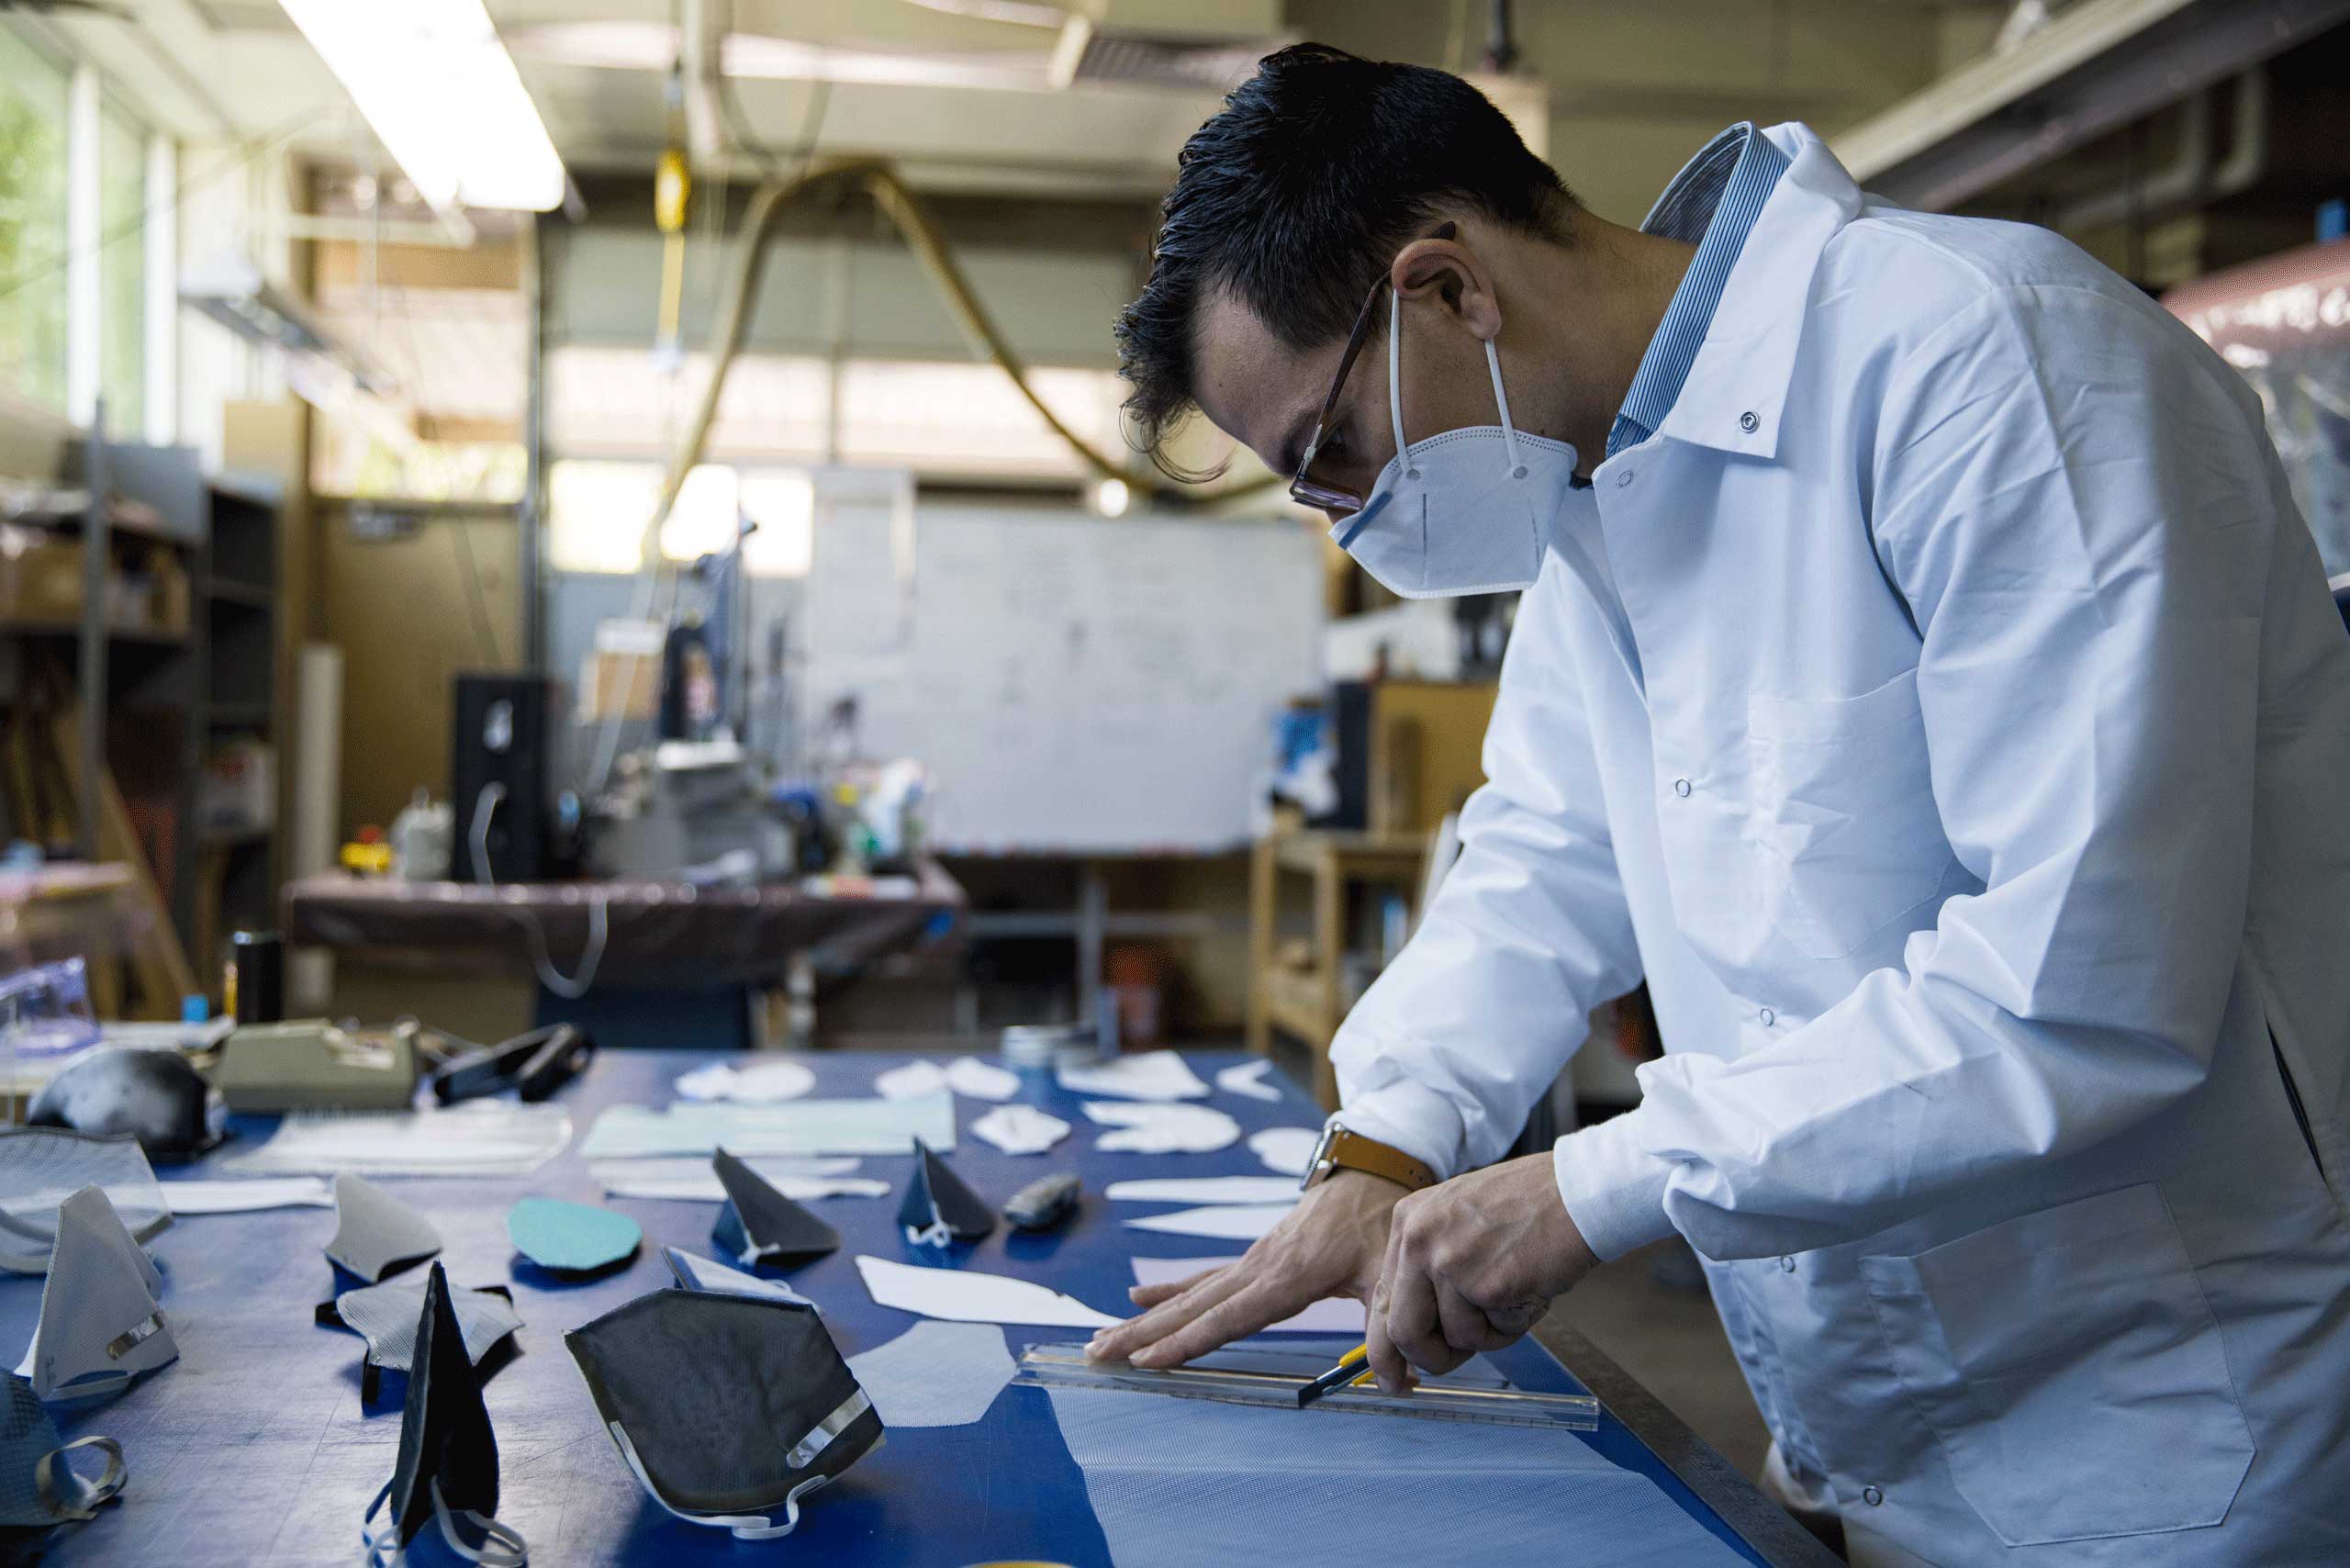 A male student in a white lab coat, wearing a mask, cuts fabric with a small blade to make cloth masks.